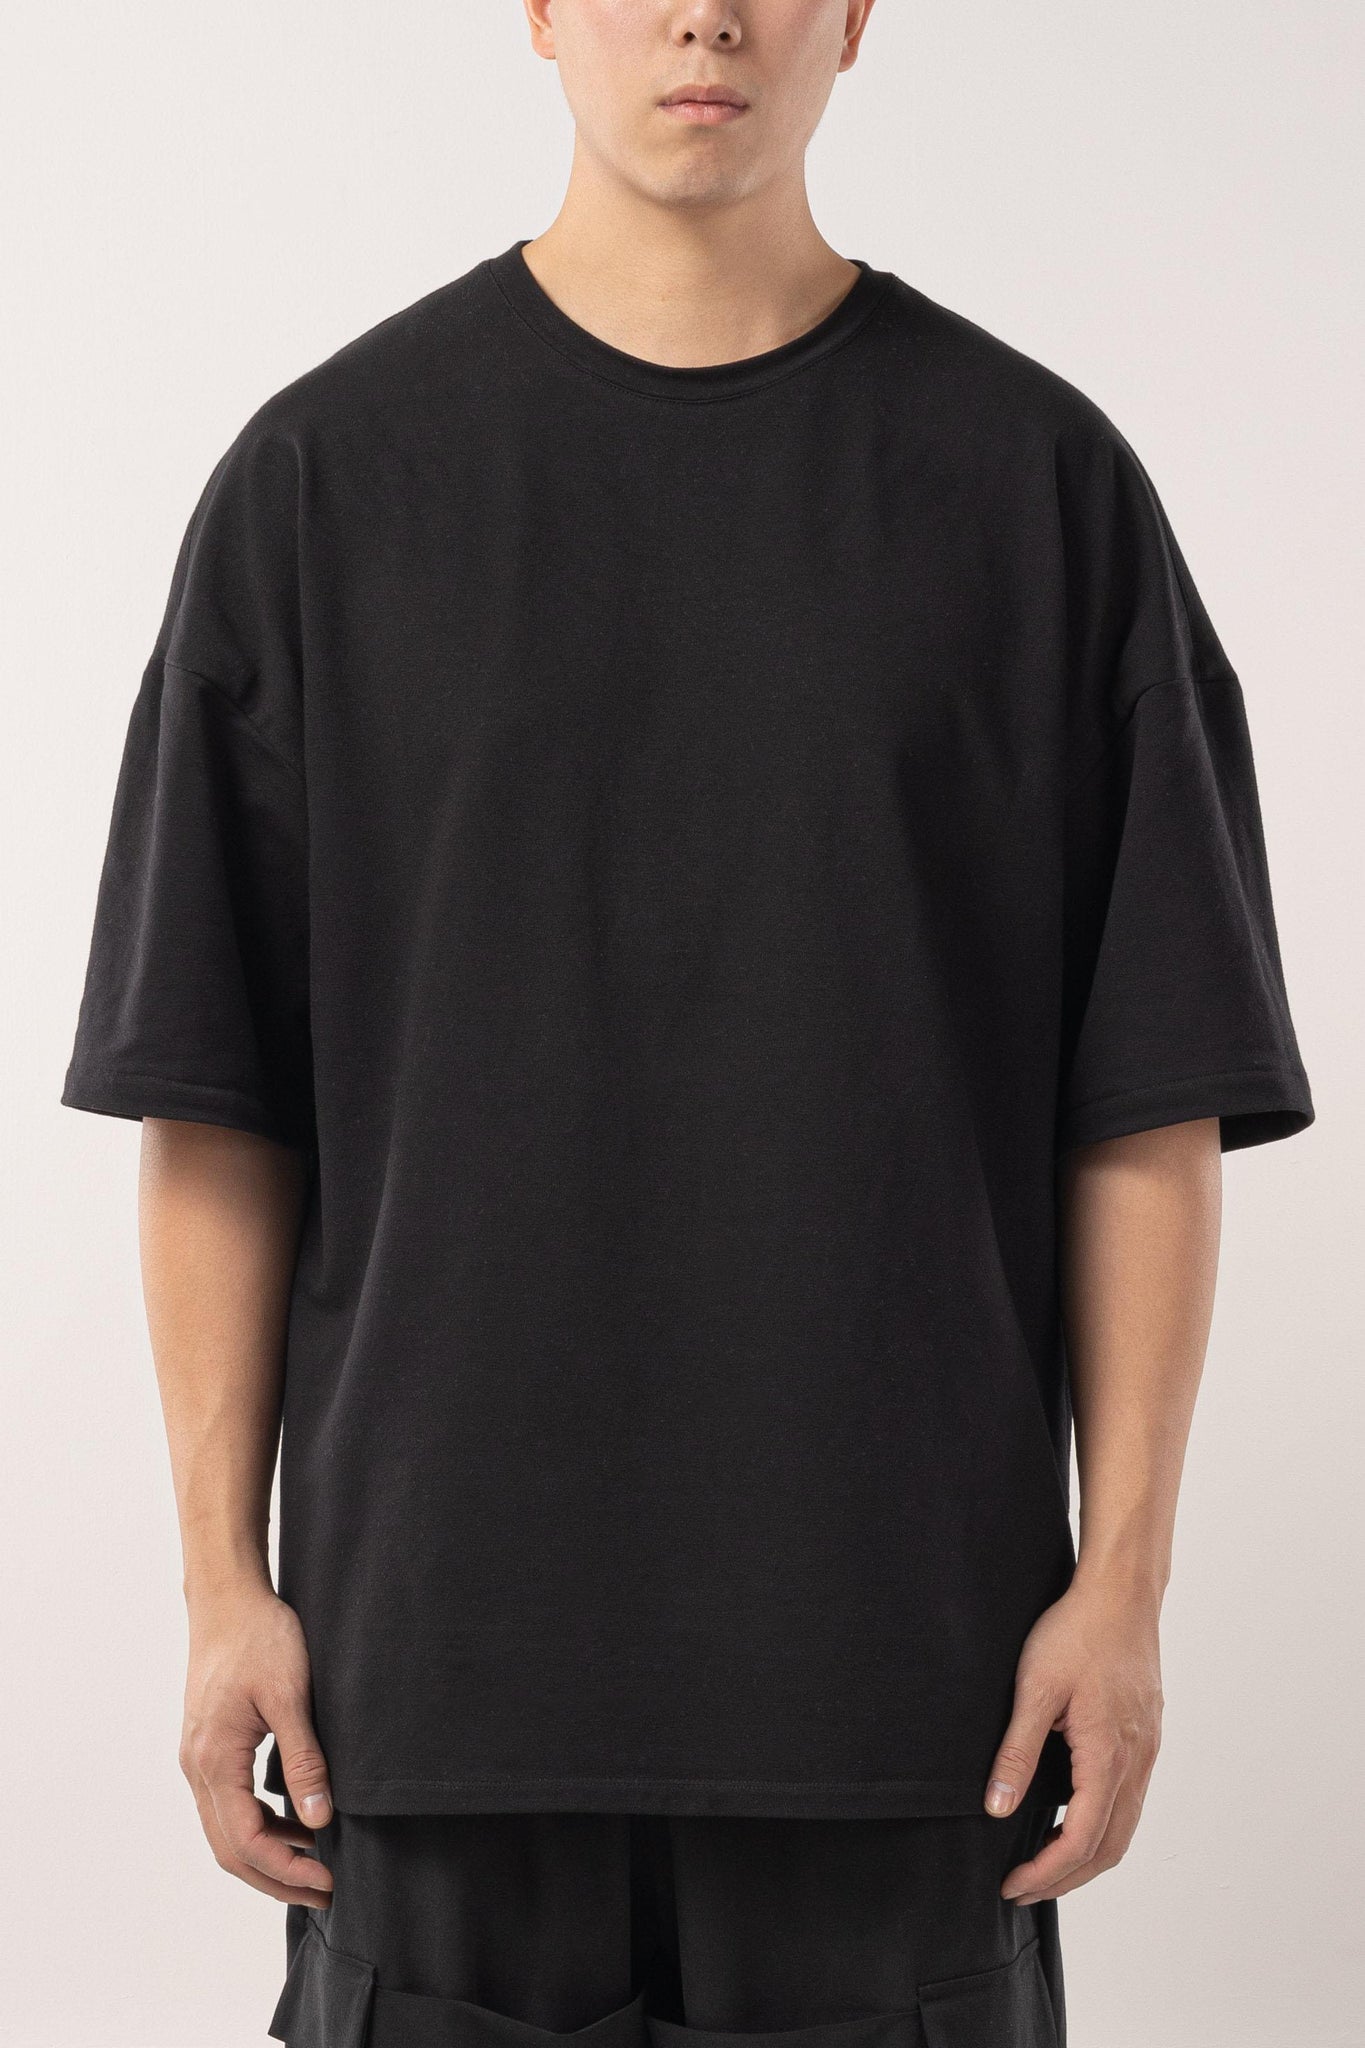 Loose fit black french terry T-shirt with drop shoulders.